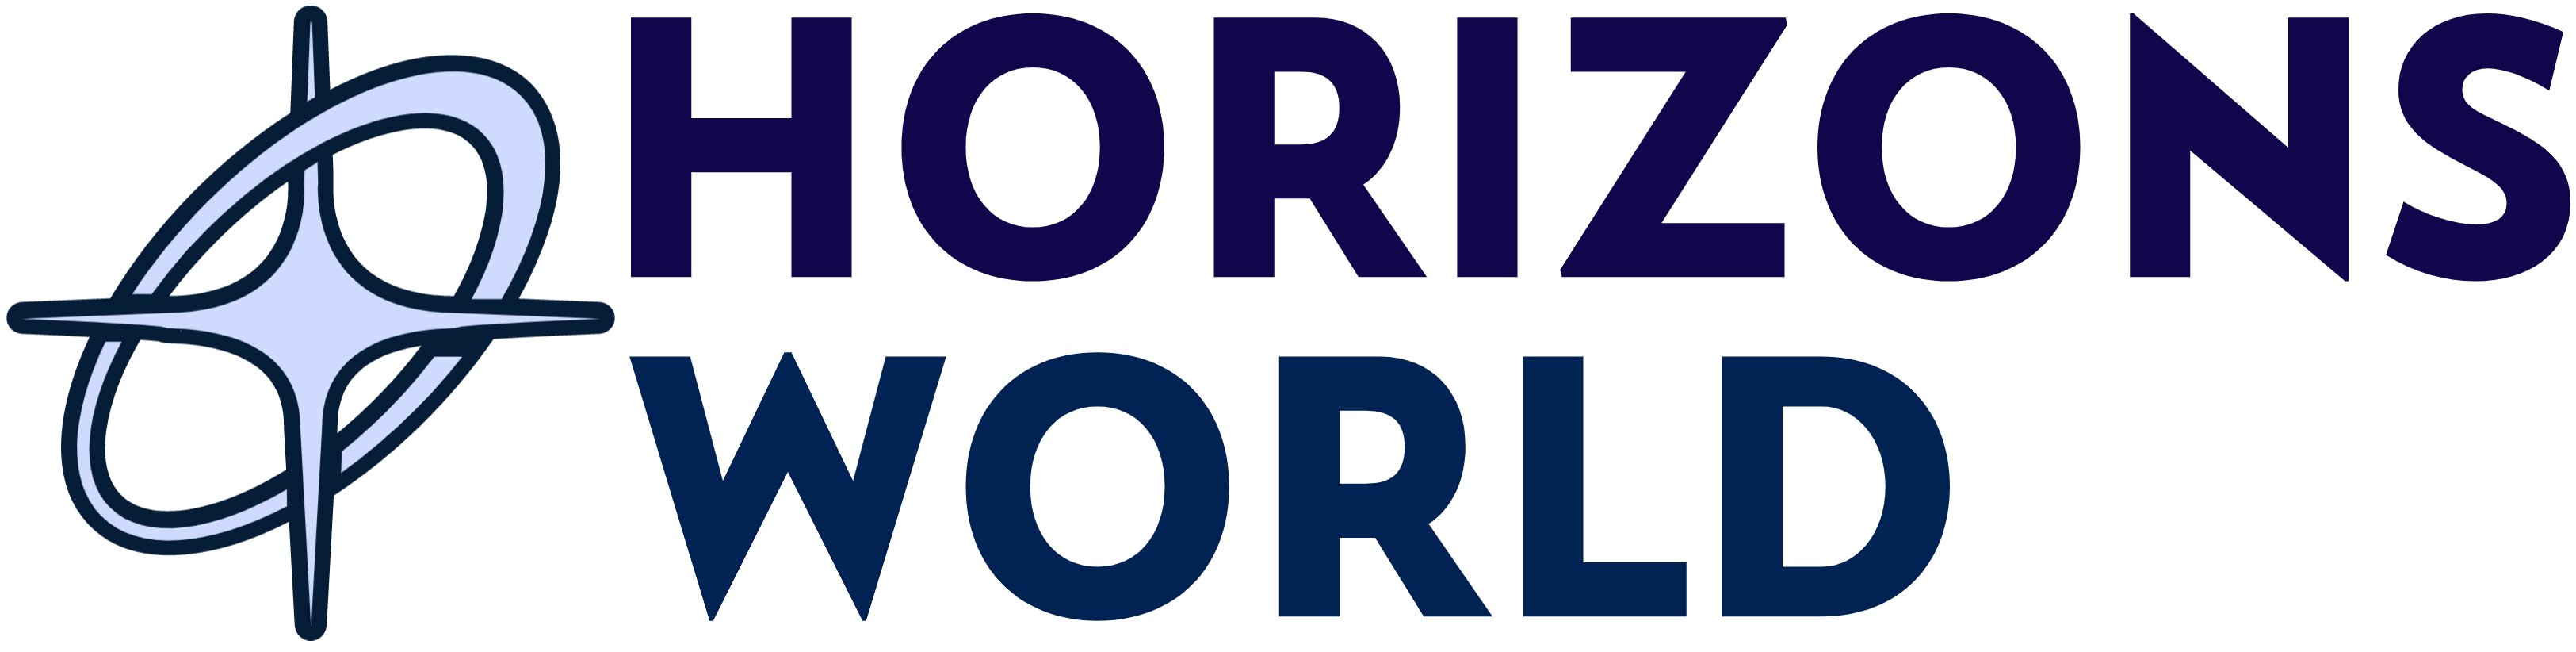 Horizons World | Investment for your Startup